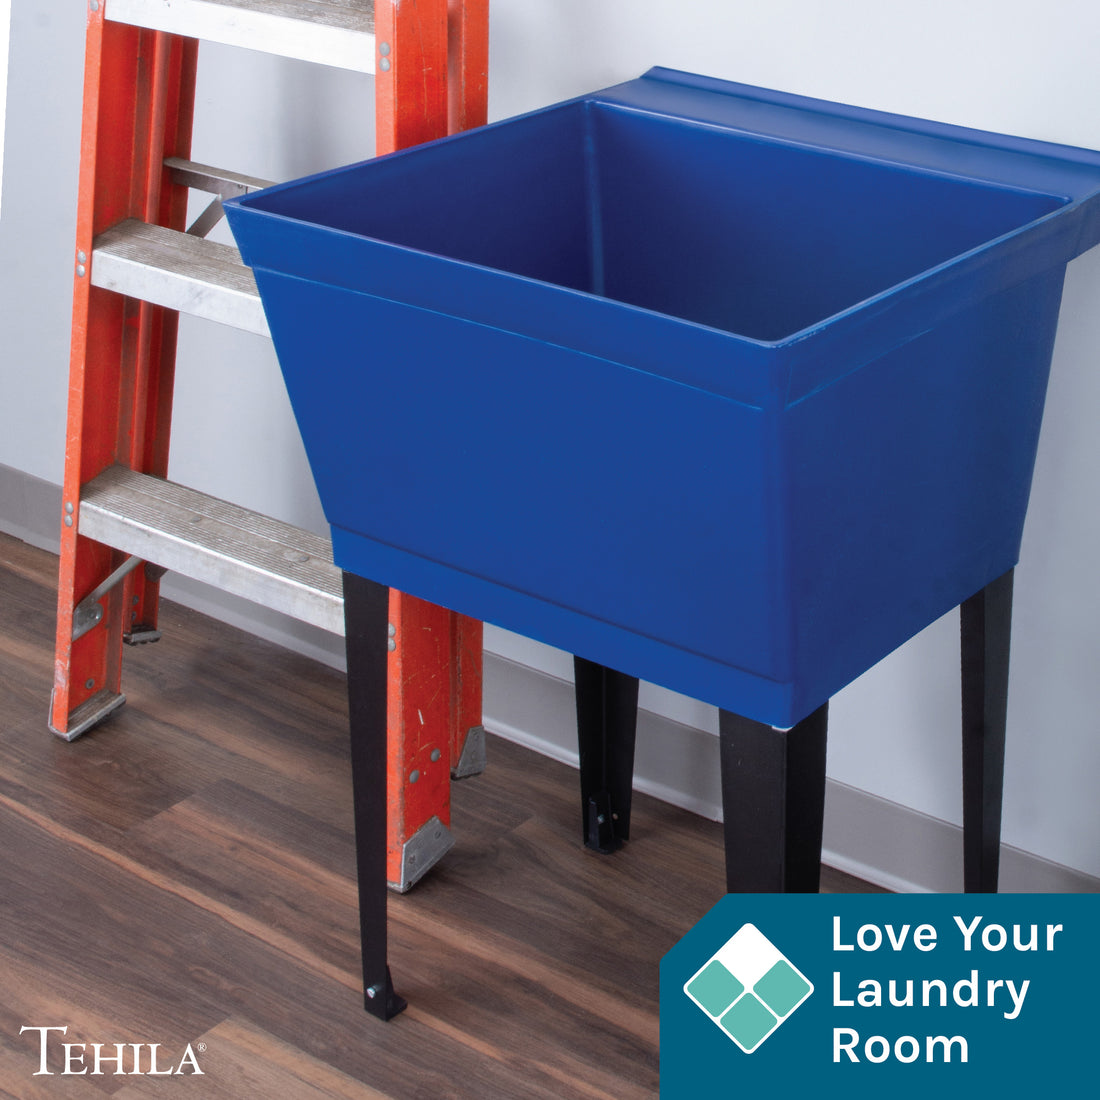 Blue Standard Utility Sinks Love Your Laundry Room